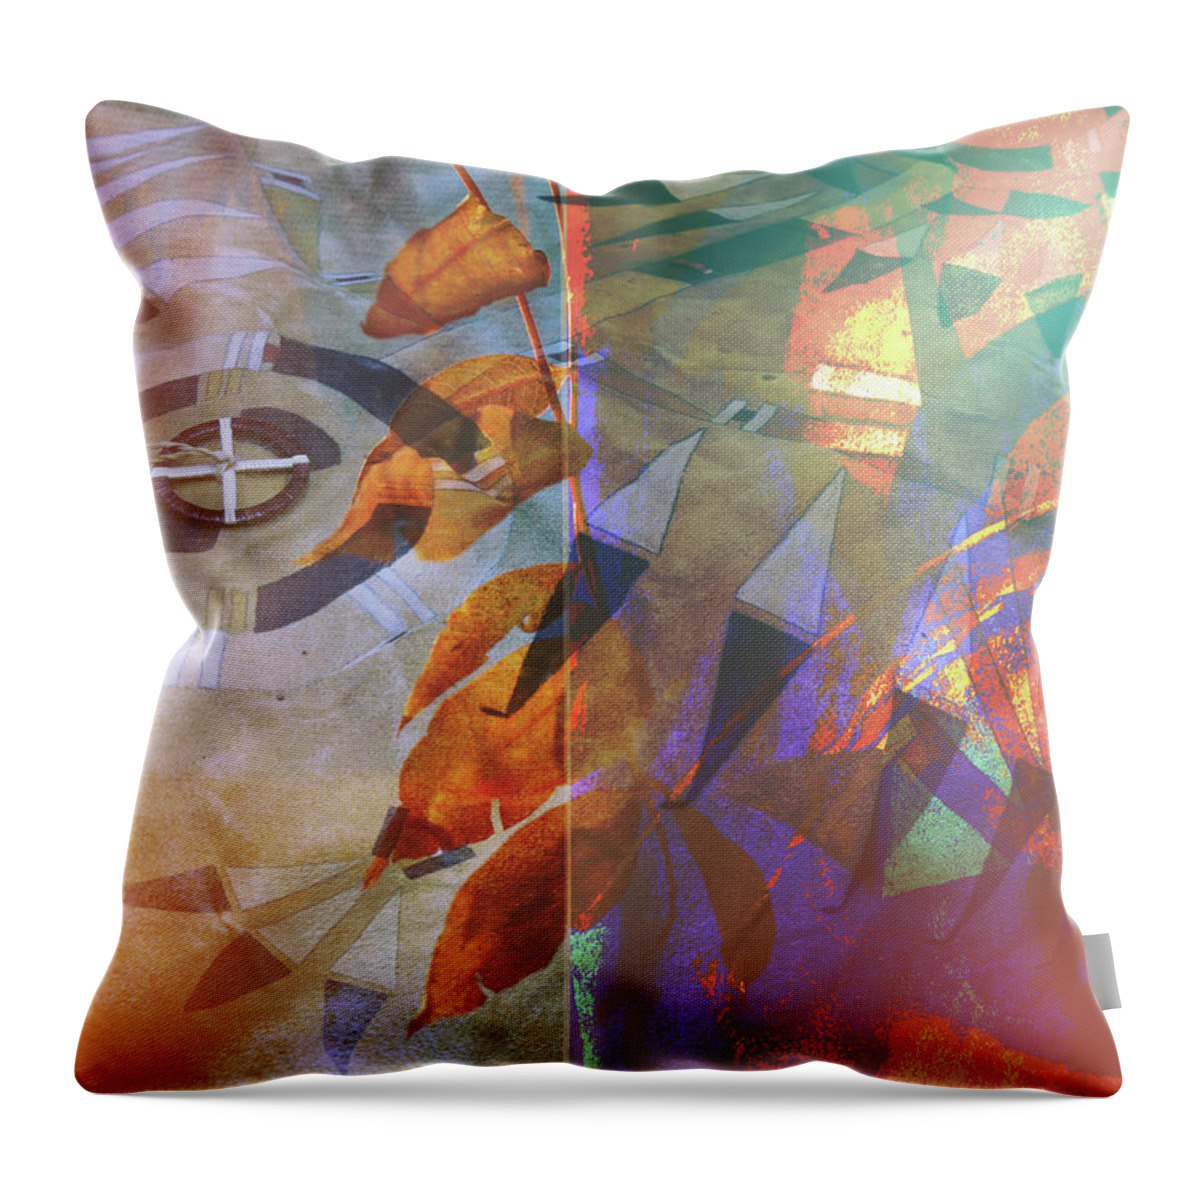 Photograph Art Throw Pillow featuring the photograph Symbolism No. 5 by Toni Hopper